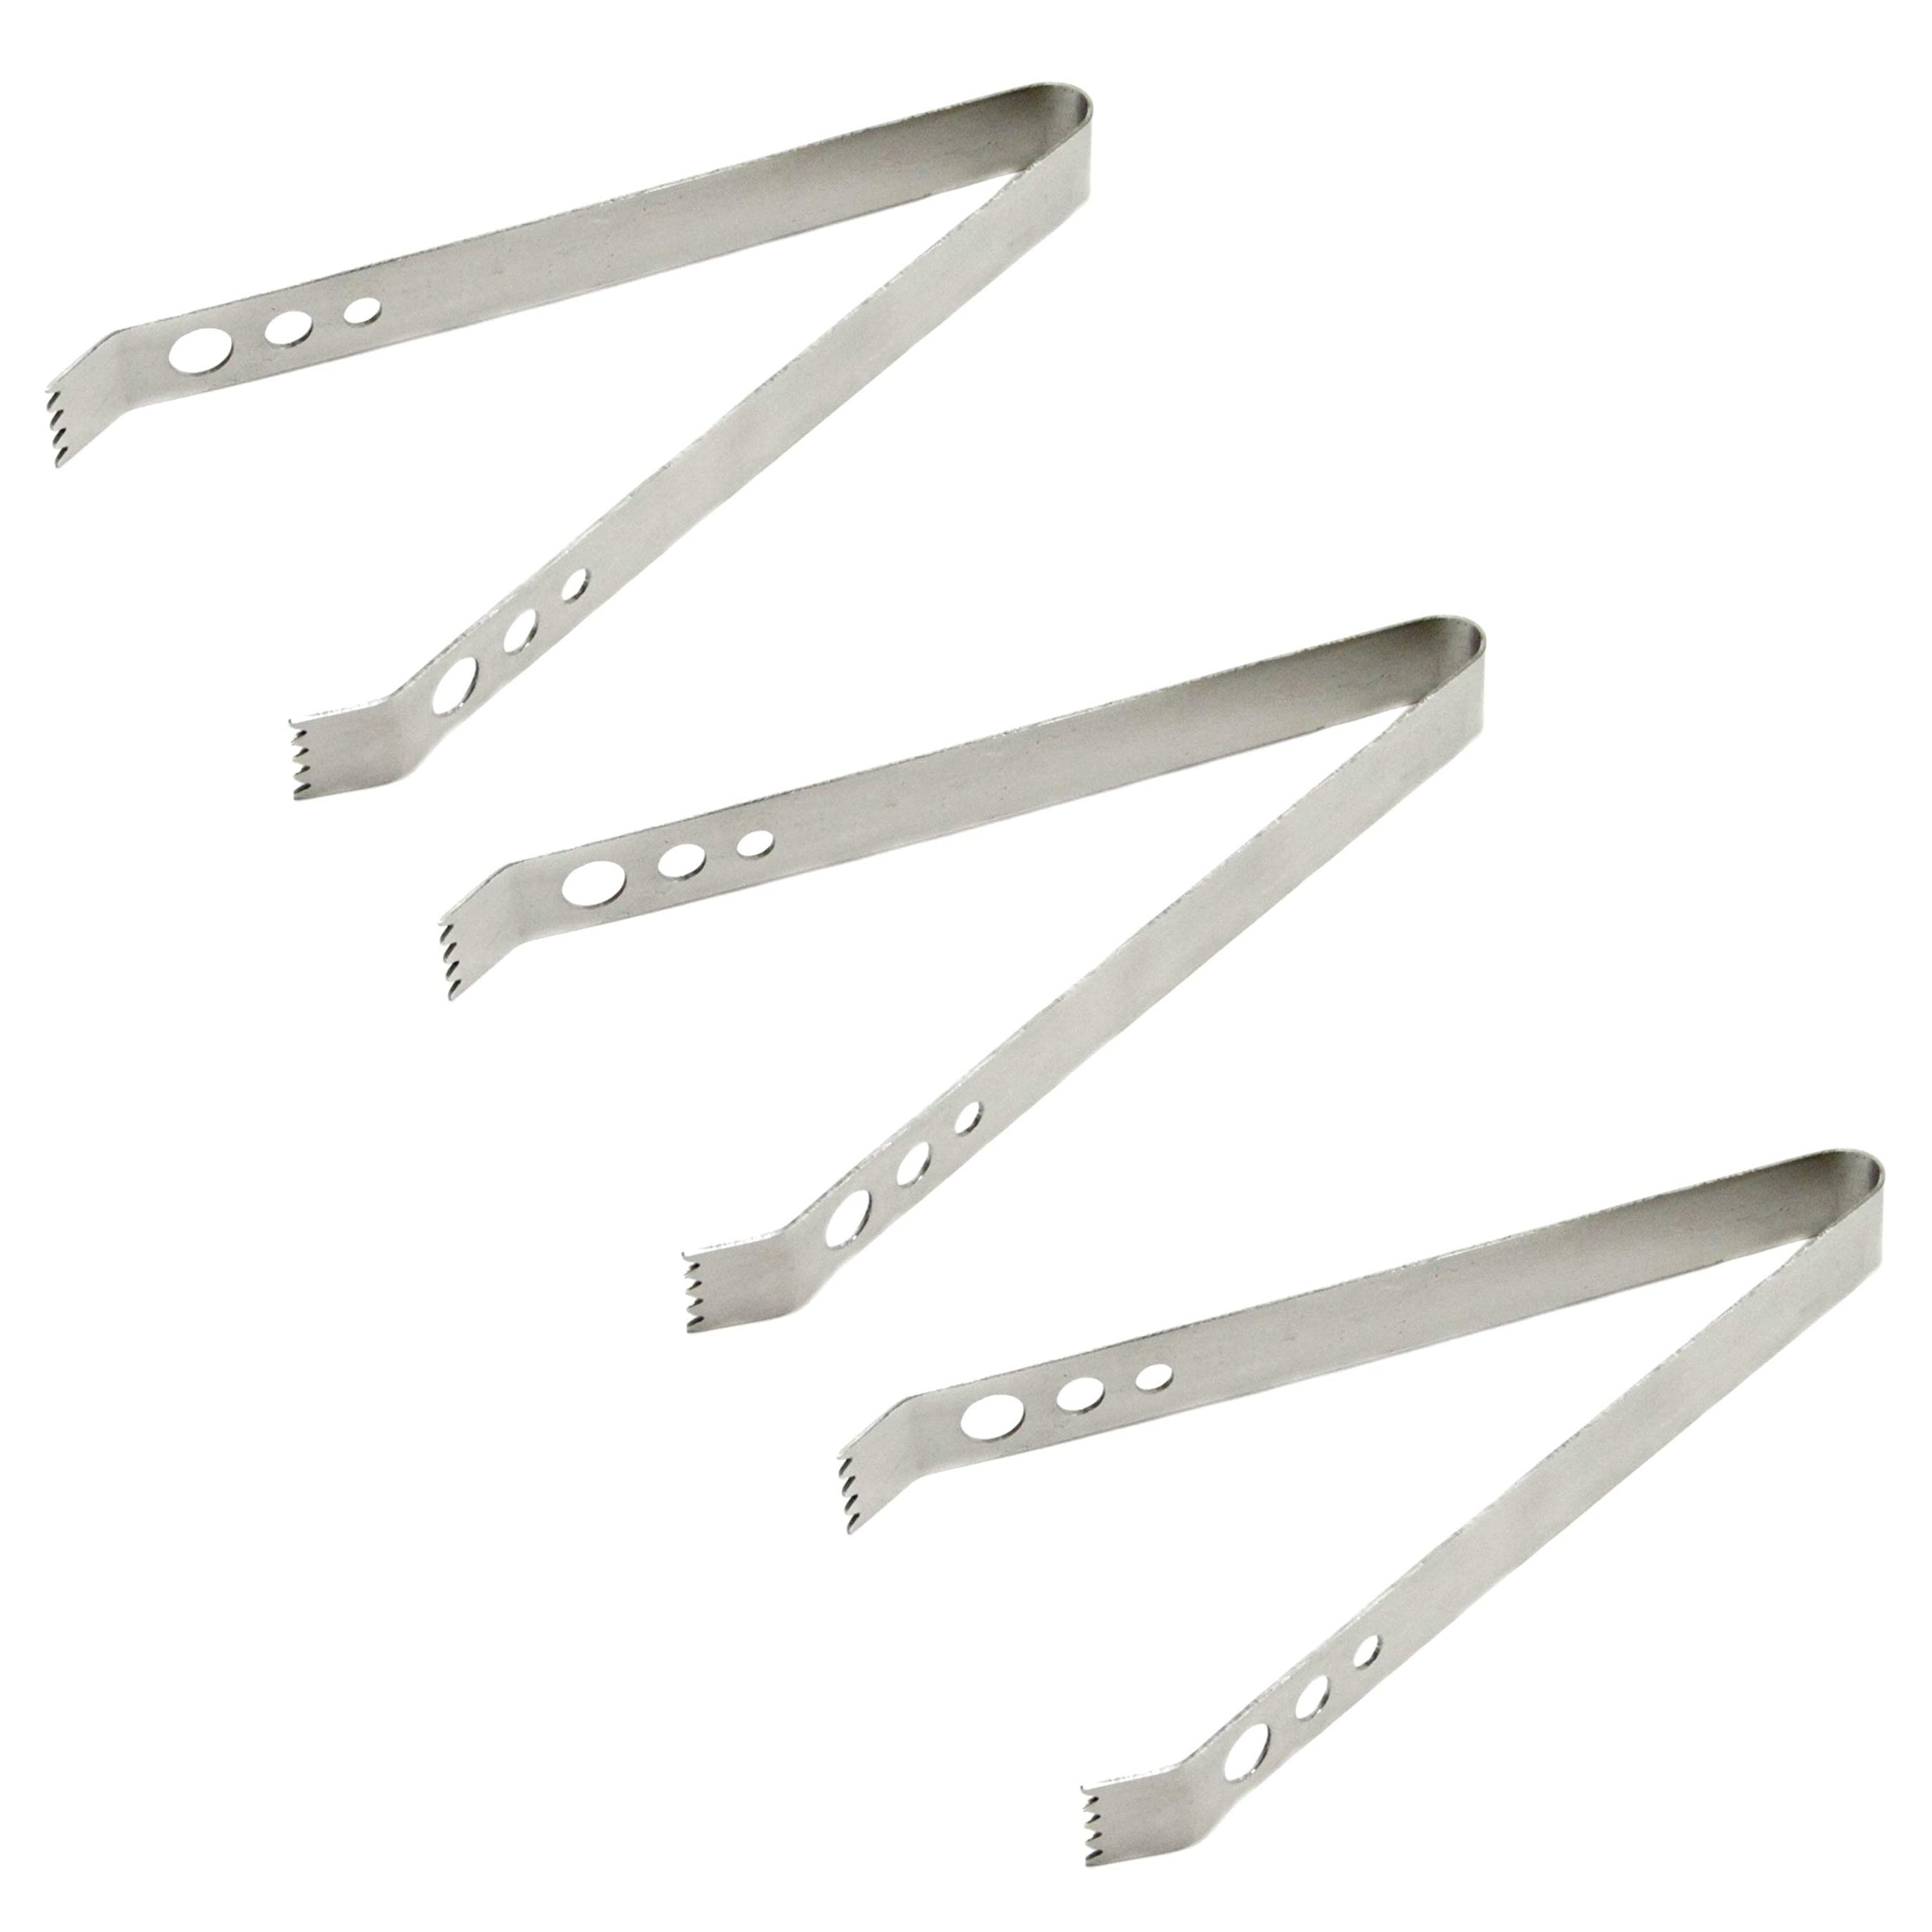 Chef Craft Tongs Stainless Steel 9in